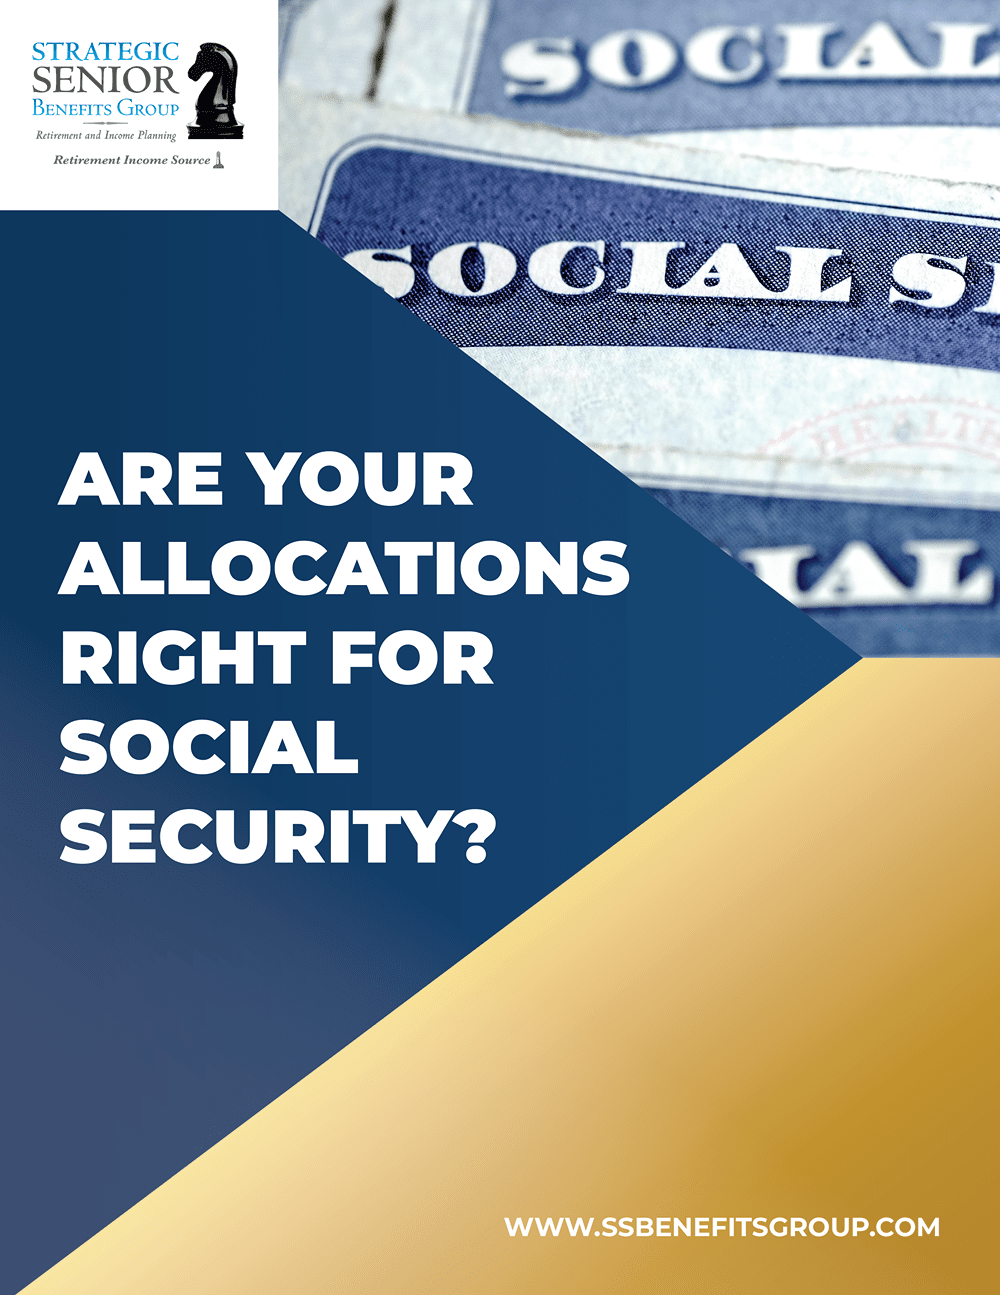 Strategic Senior Benefits Group - Are Your Allocations Right for Social Security-1